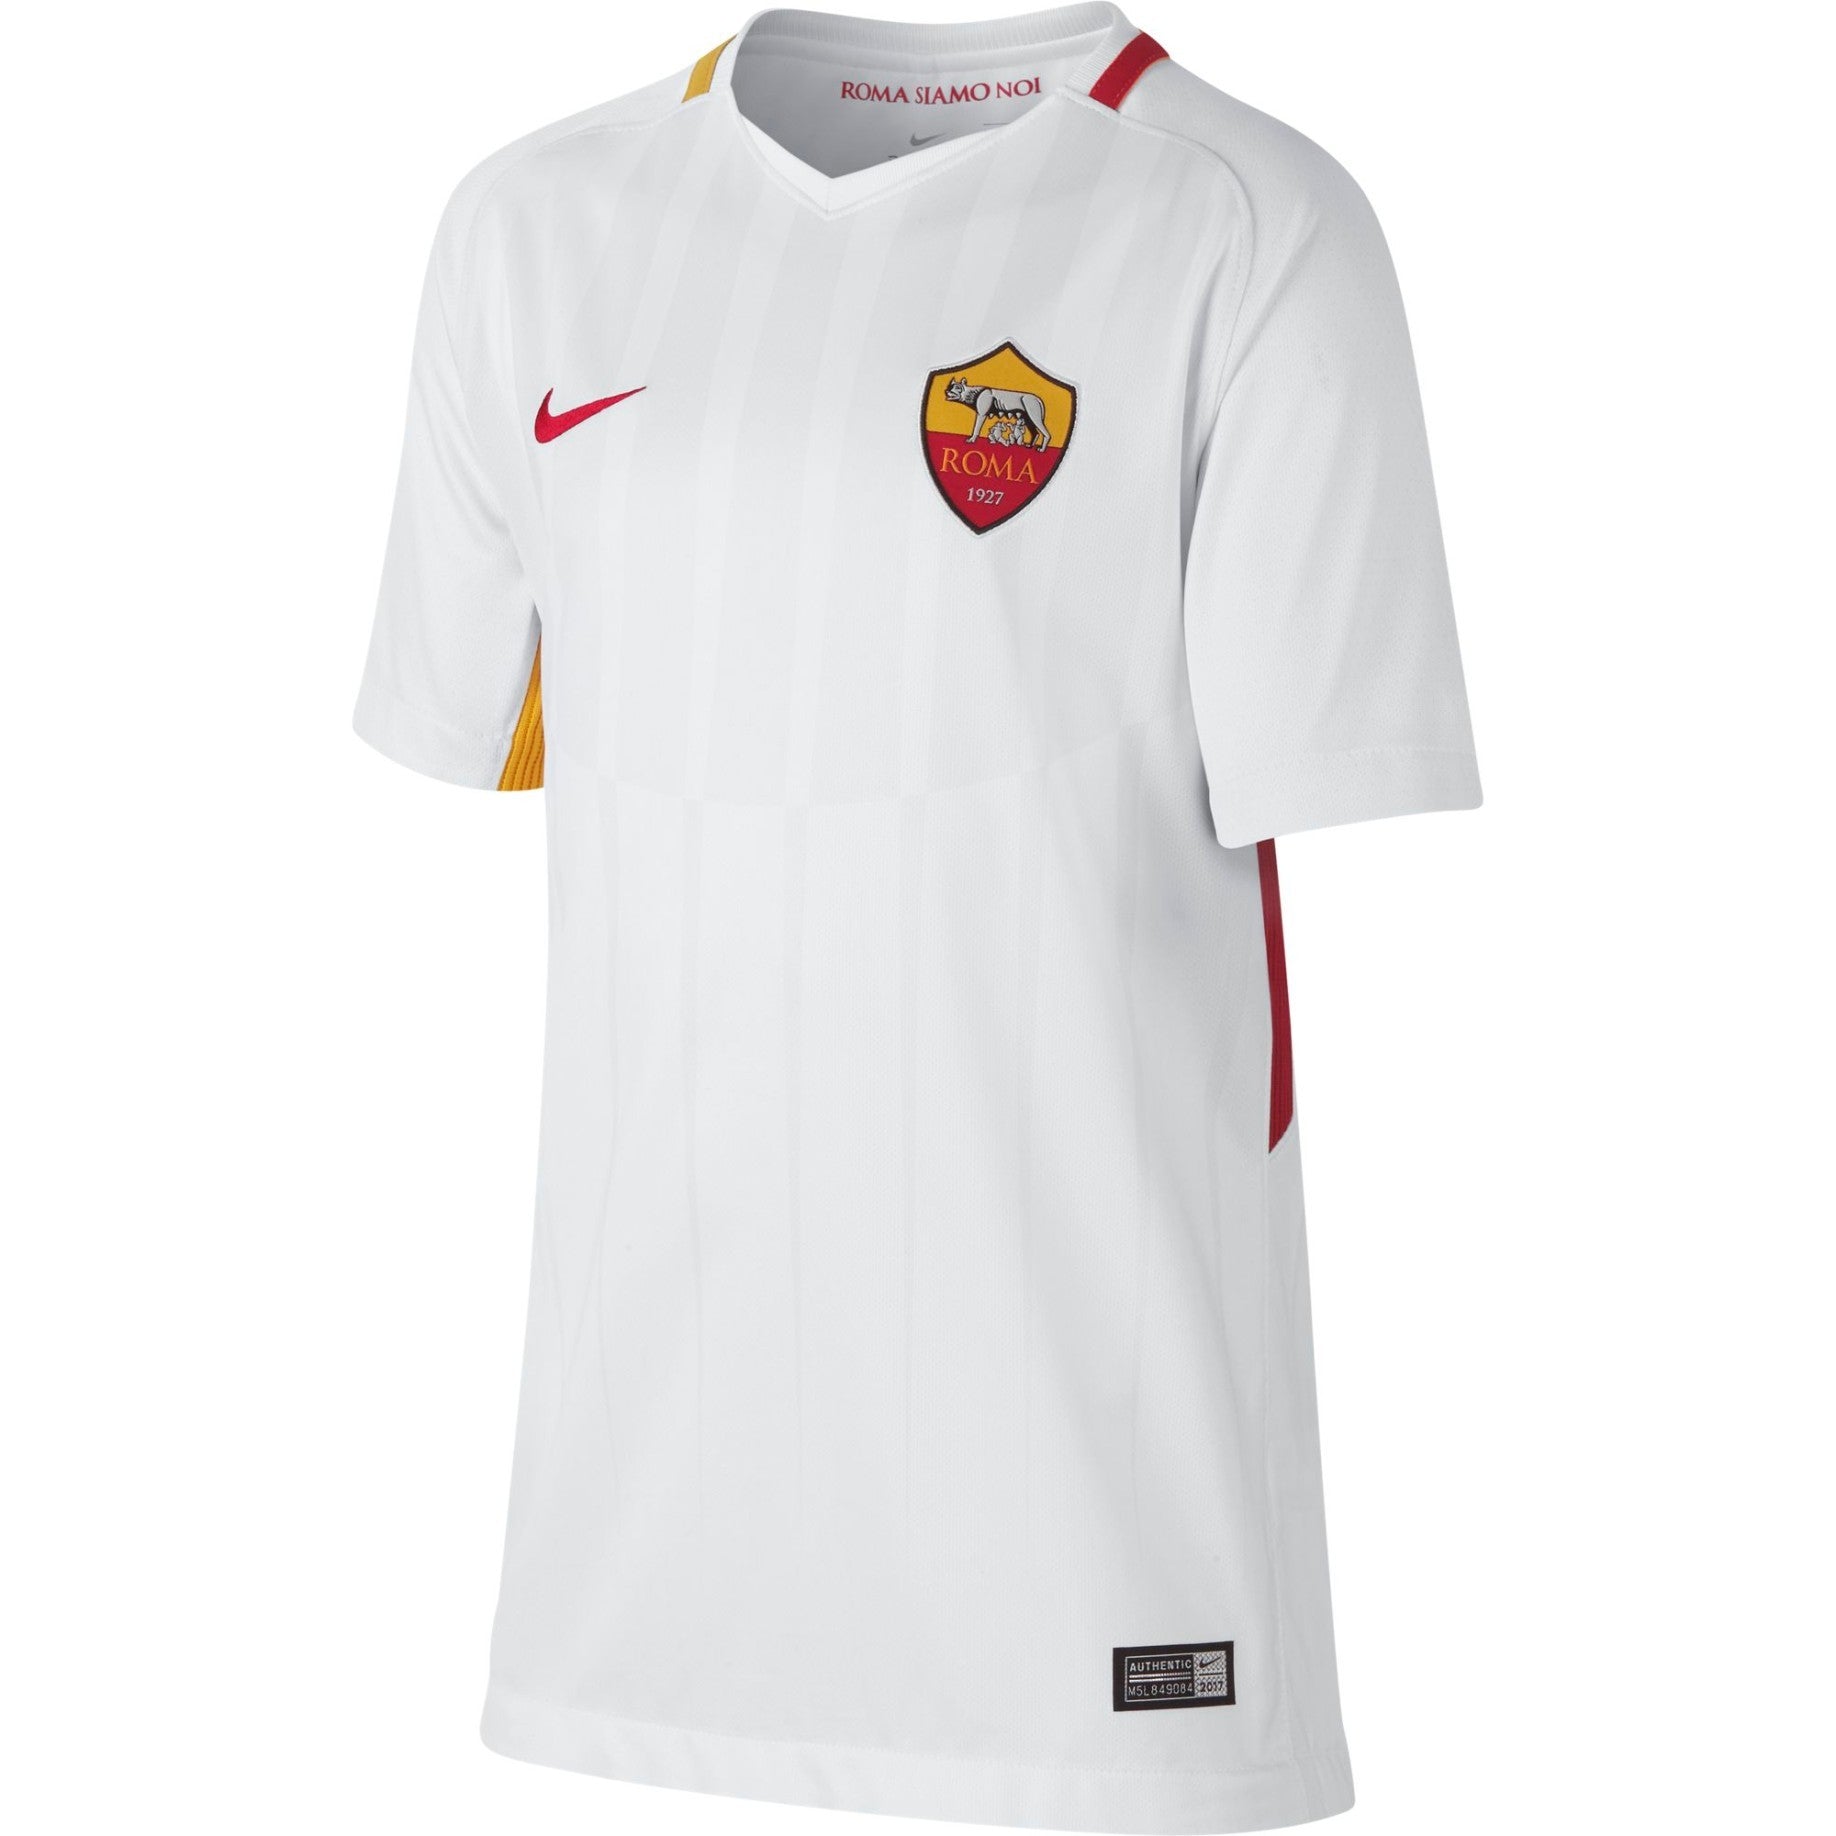 Nike Roma Away Junior Jersey 2017/18 item: 847416-100 Sports Outlet